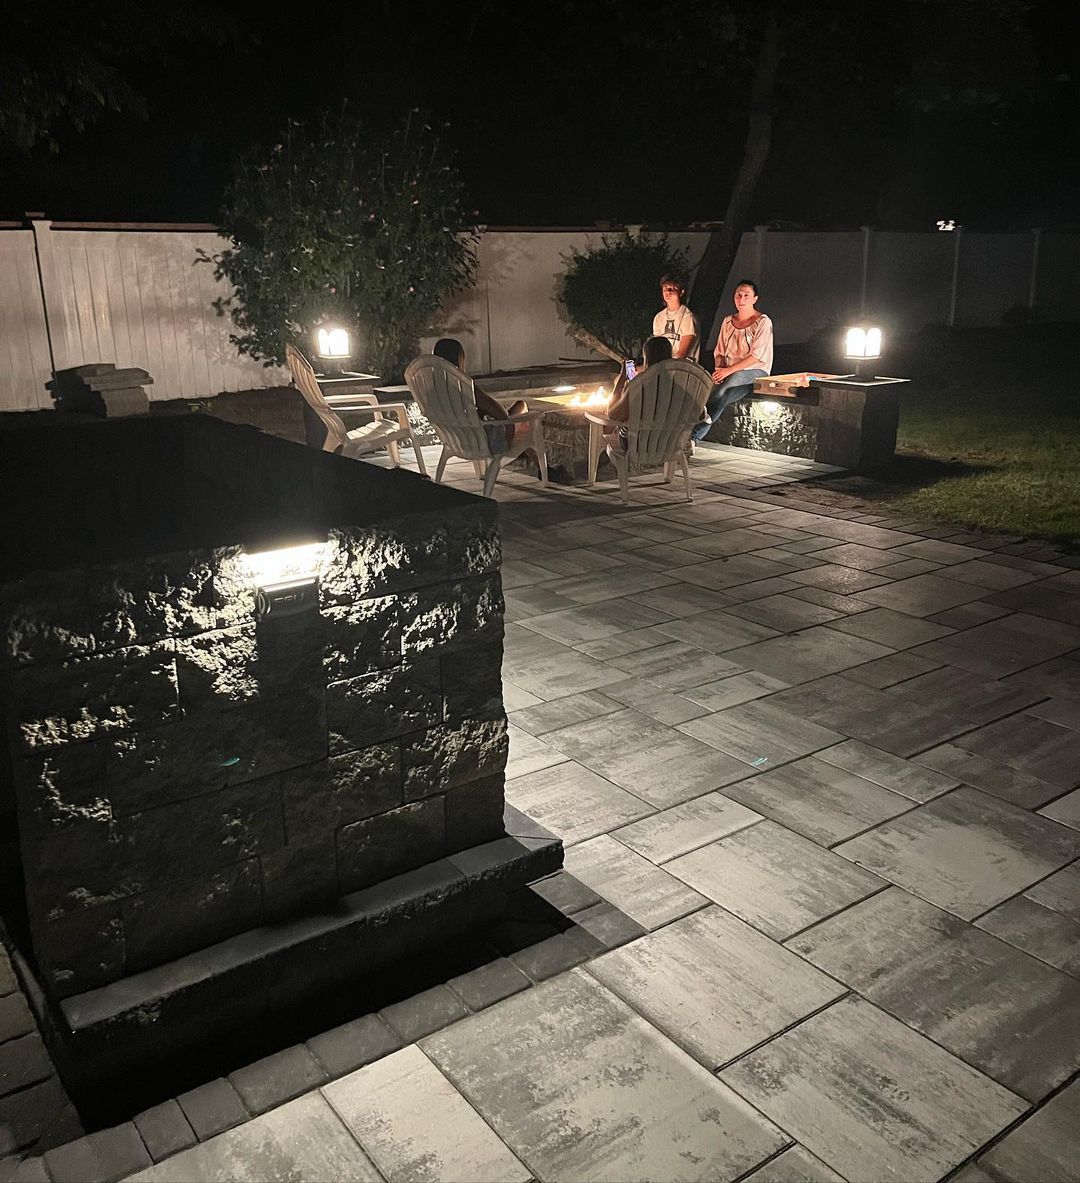 <p>Nothing gives us more pleasure then watching our homeowners enjoying there new outdoor living space. Down to the finishing touches in West Islip, Thank you for your patience 🙏🏻. Enjoy 🔥🍷 #stonecreationsoflongisland #masonry #pavers #patios #pools #kitchens #bars #firefeatures #waterfeatures #outdoorliving #pros #cambridgepavers #XL #smooth #westislip #longisland #newyork  (at West Islip, New York)<br/>
<a href="https://www.instagram.com/p/ChJCamUOFmn/?igshid=NGJjMDIxMWI=" target="_blank">https://www.instagram.com/p/ChJCamUOFmn/?igshid=NGJjMDIxMWI=</a></p>